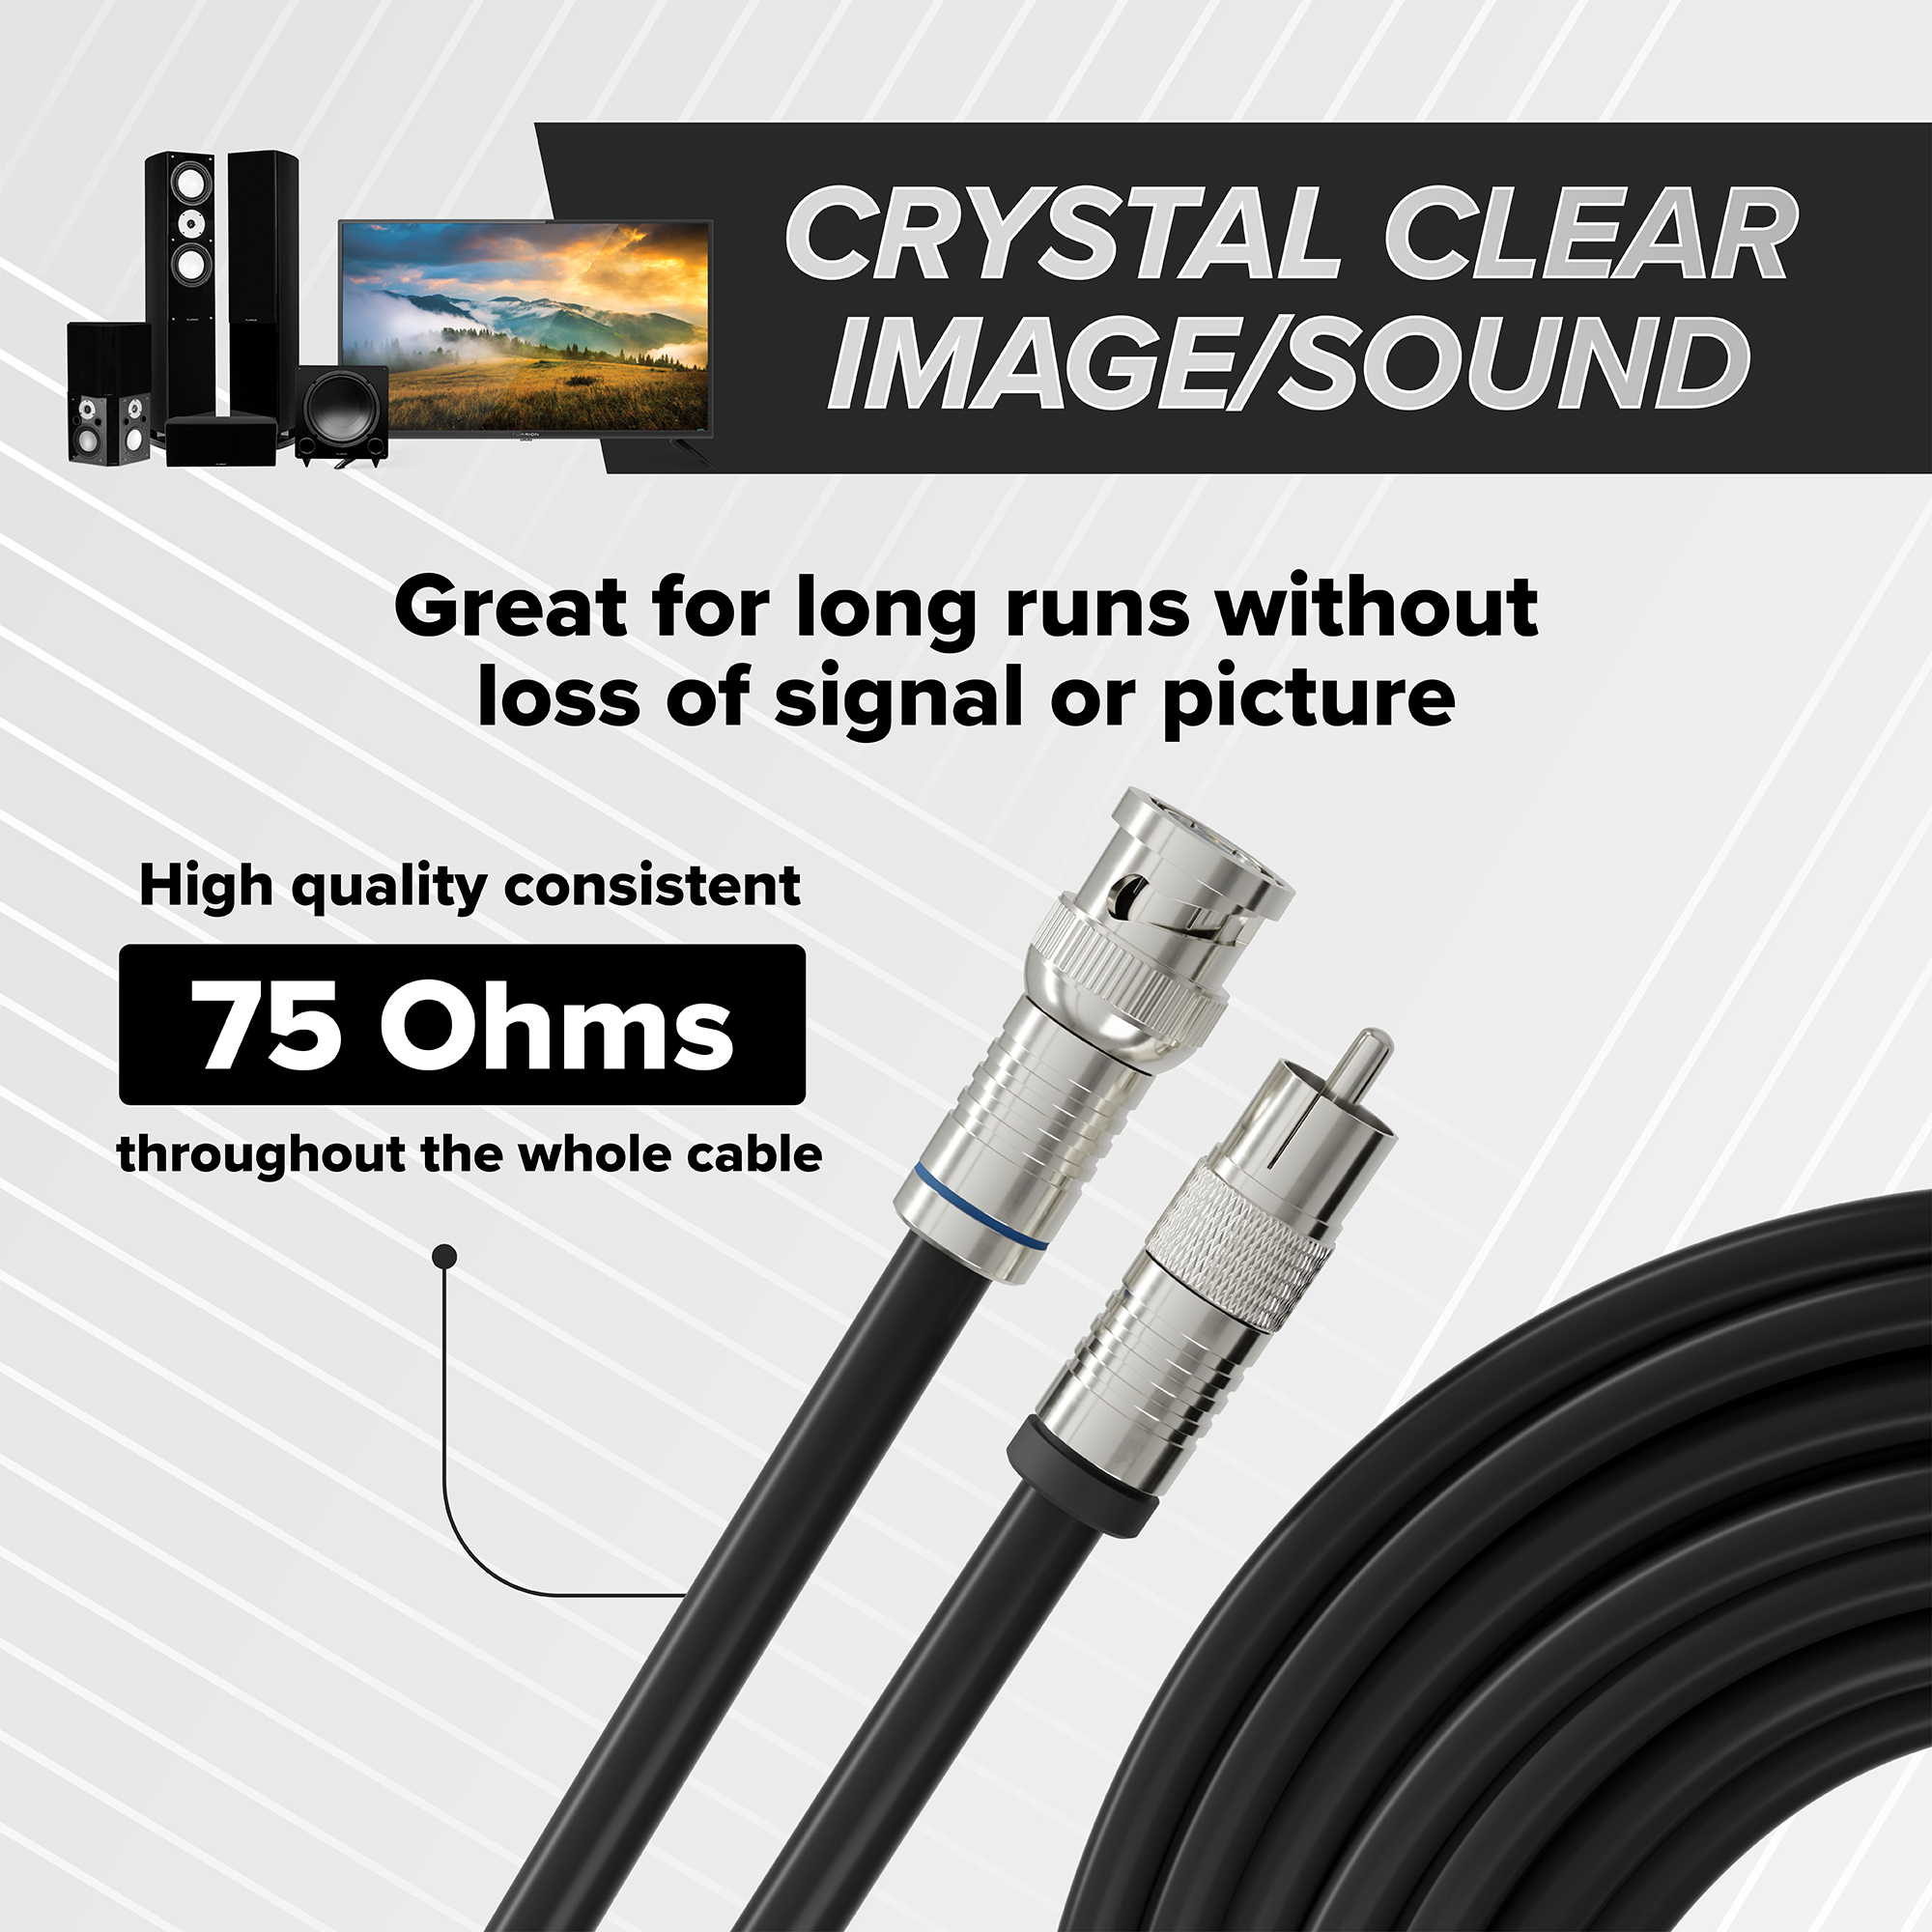 Black, 25 ft BNC to RCA RG6 Cable - Professional Grade - Male BNC to Male RCA Cable  - BNC Cable - 75 Ohm Coaxial, 50/75 Ohm Connectors, SDI, HD-SDI, CCTV, Camera, and More - 25 Feet Long, in Black - image 5 of 10